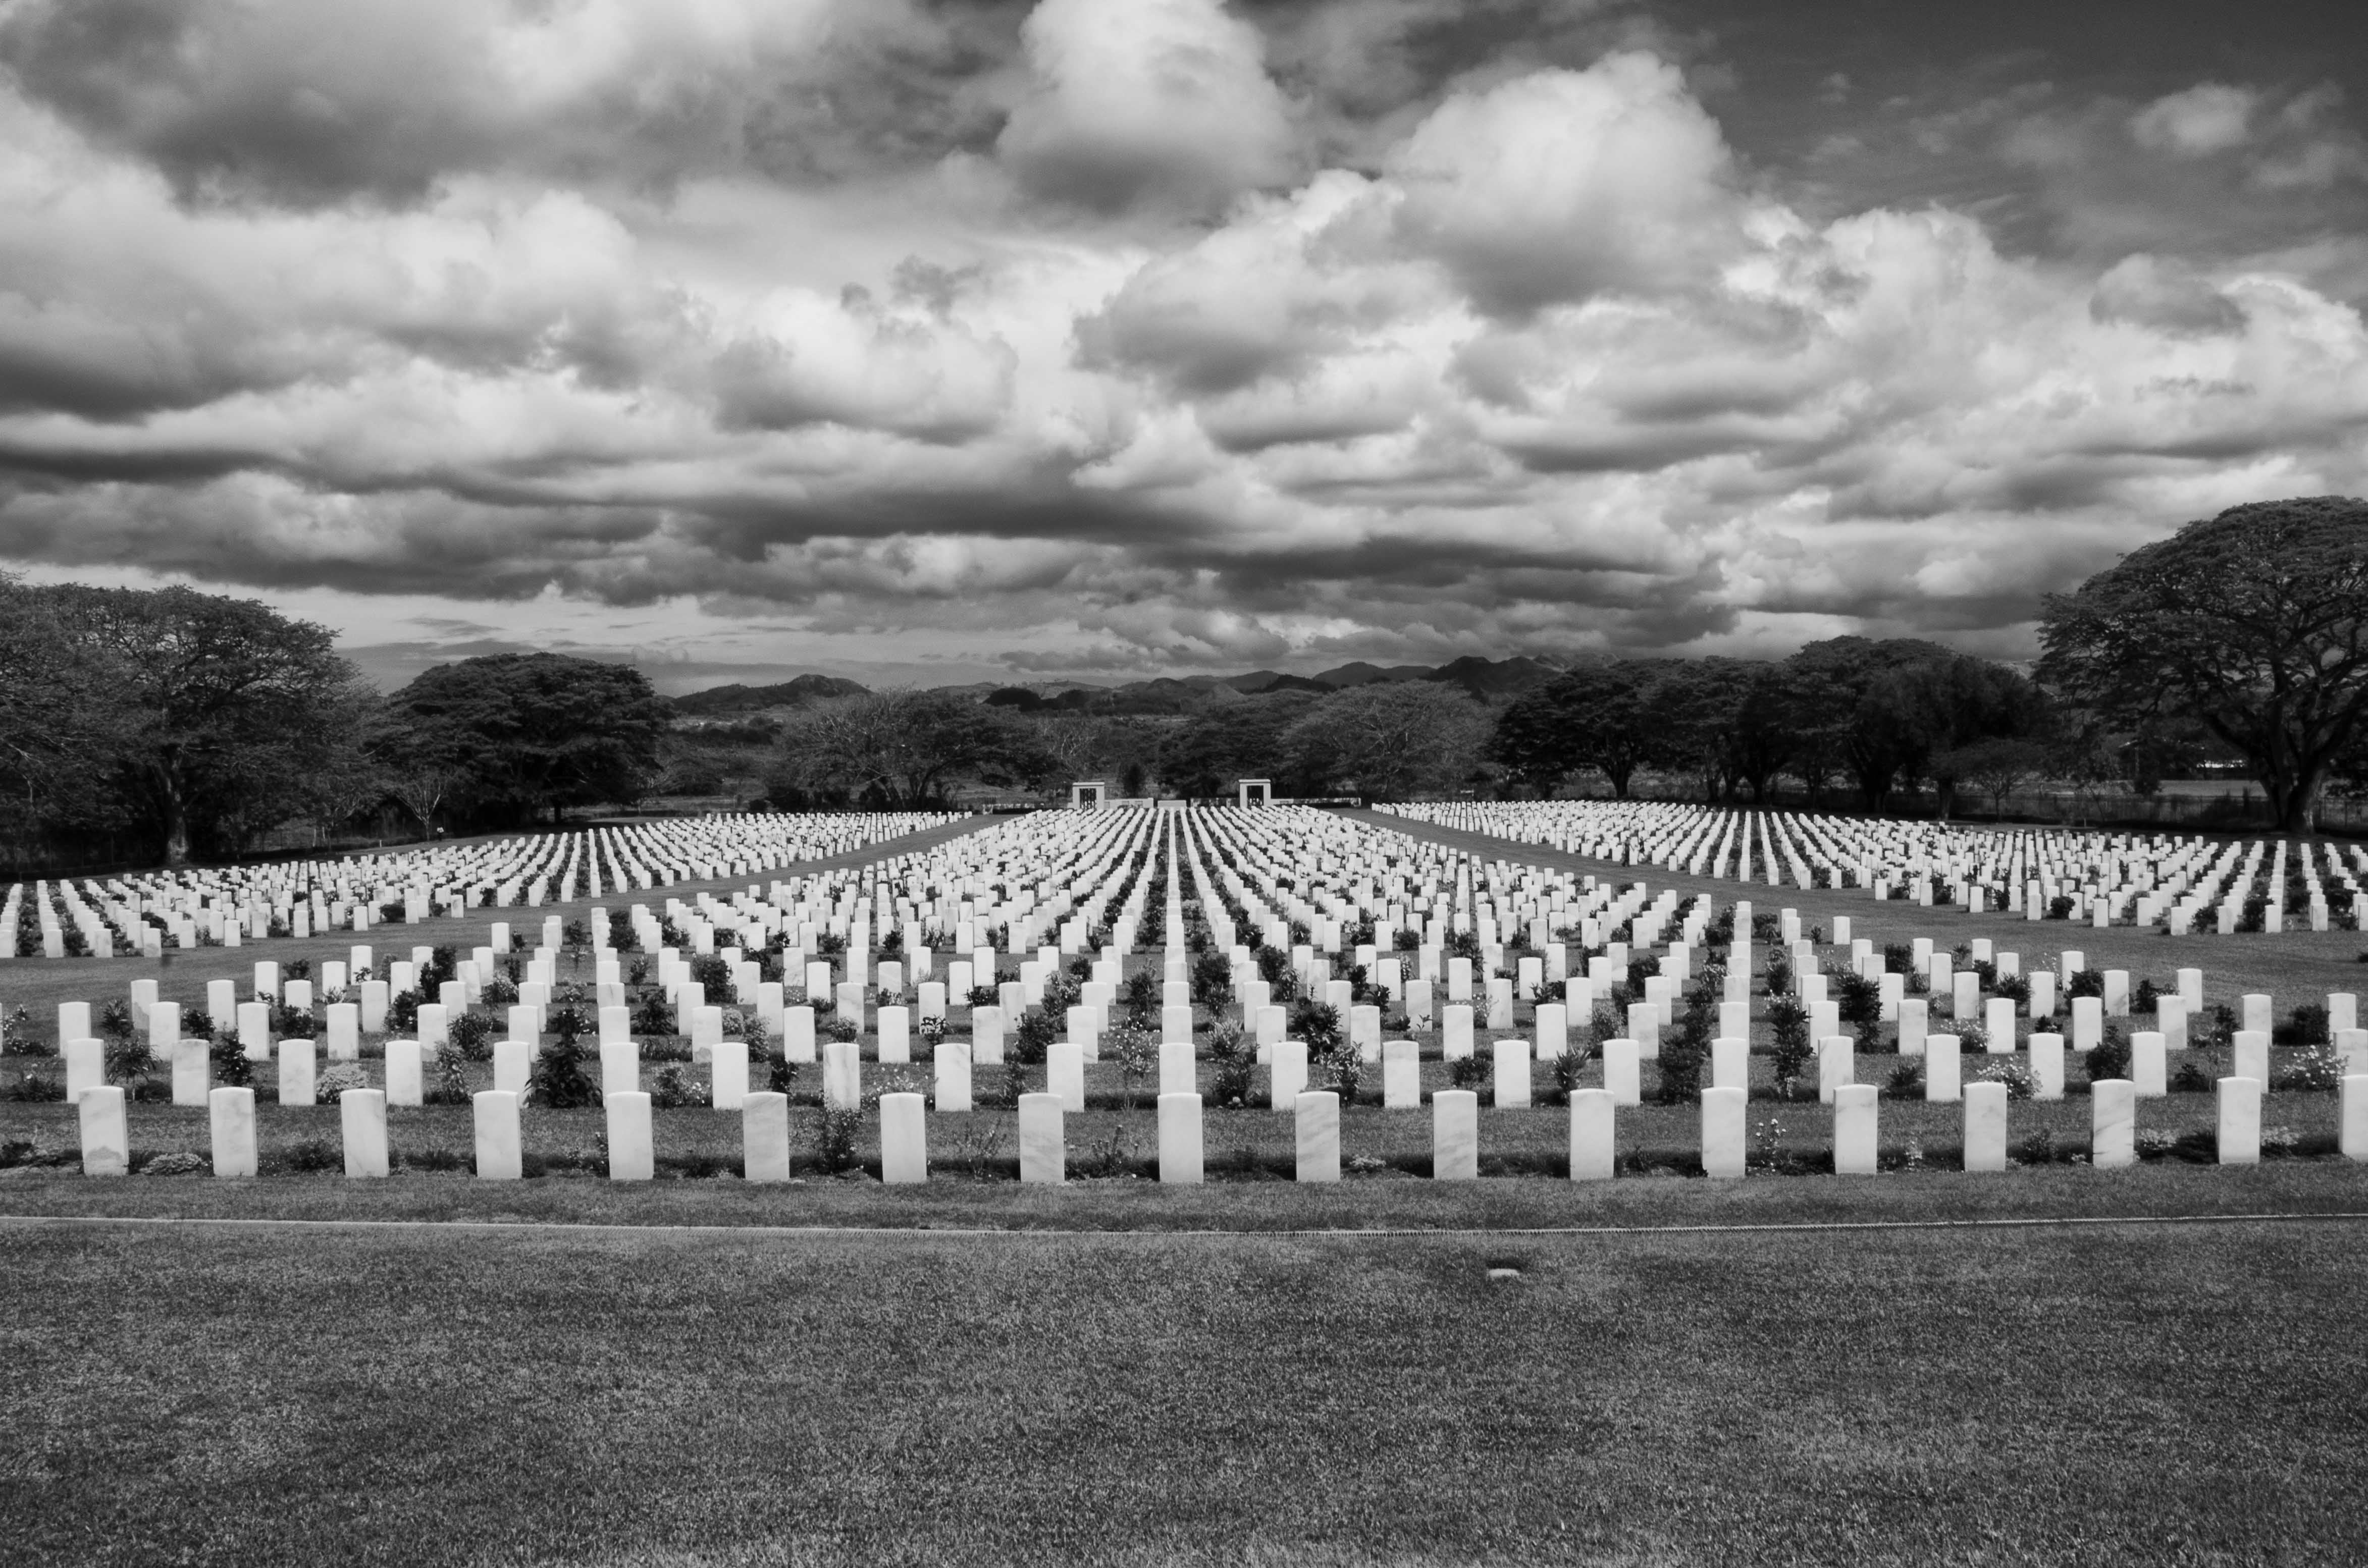  The Australian War Cemetery at Bomana.  I couldn't help but imagine that even just a small section of this cemetery represented more people than I have ever met. 